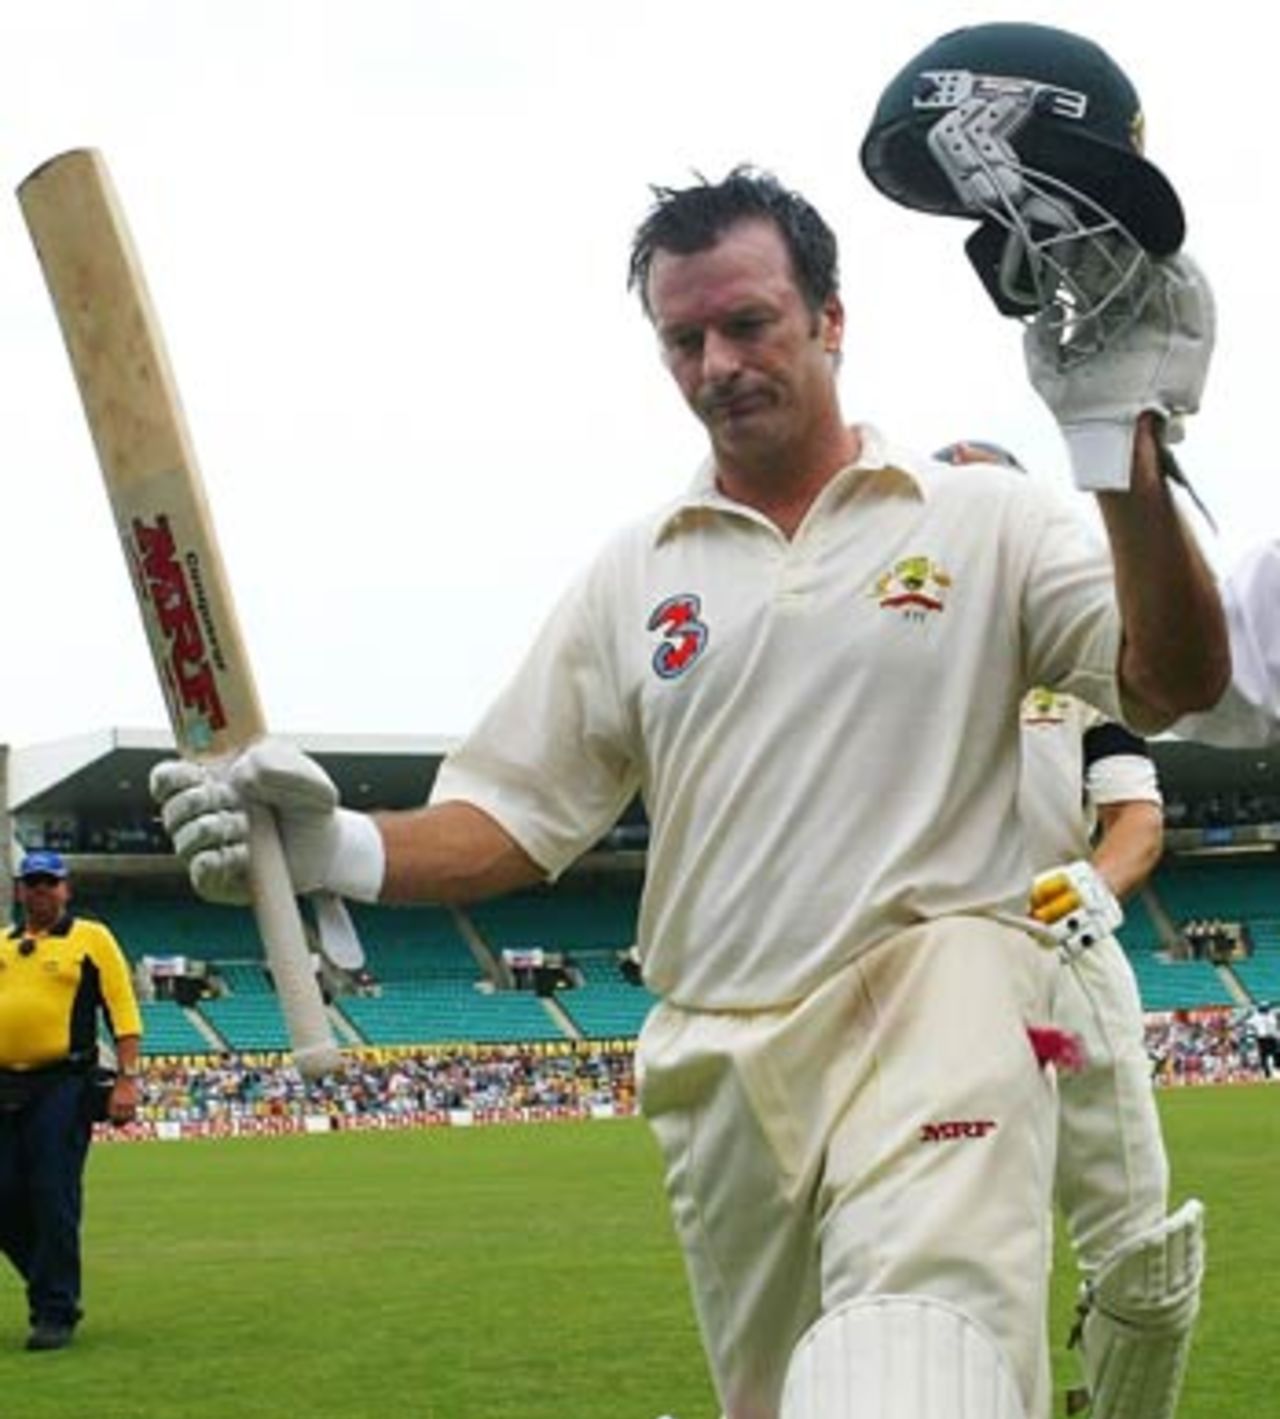 Steve Waugh walked off and took with him all the emotion and tension of a draining day, Australia v India, 4th Test, Sydney, 5th day, January 6, 2004